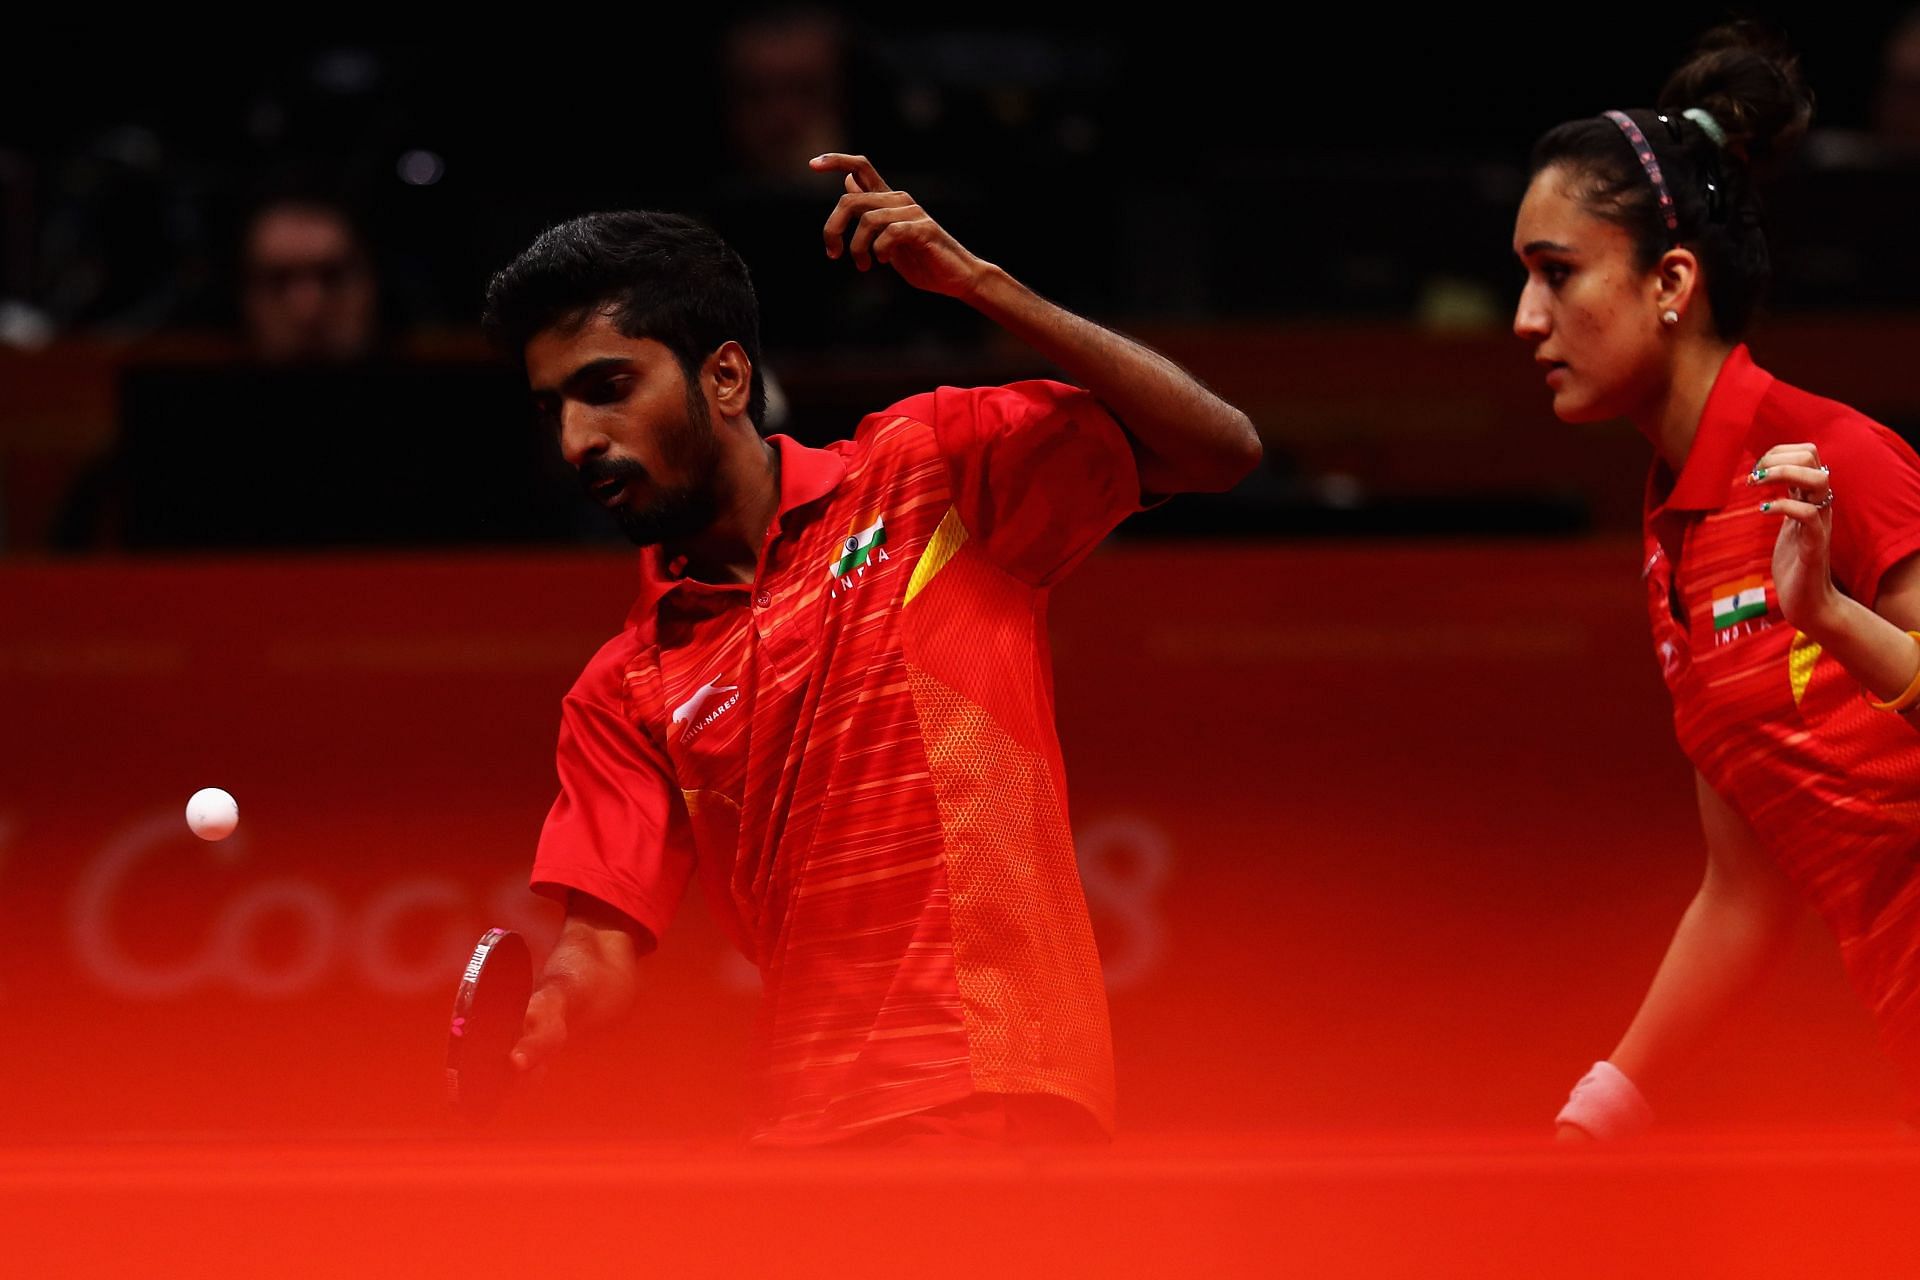 Table Tennis - Commonwealth Games Day 11